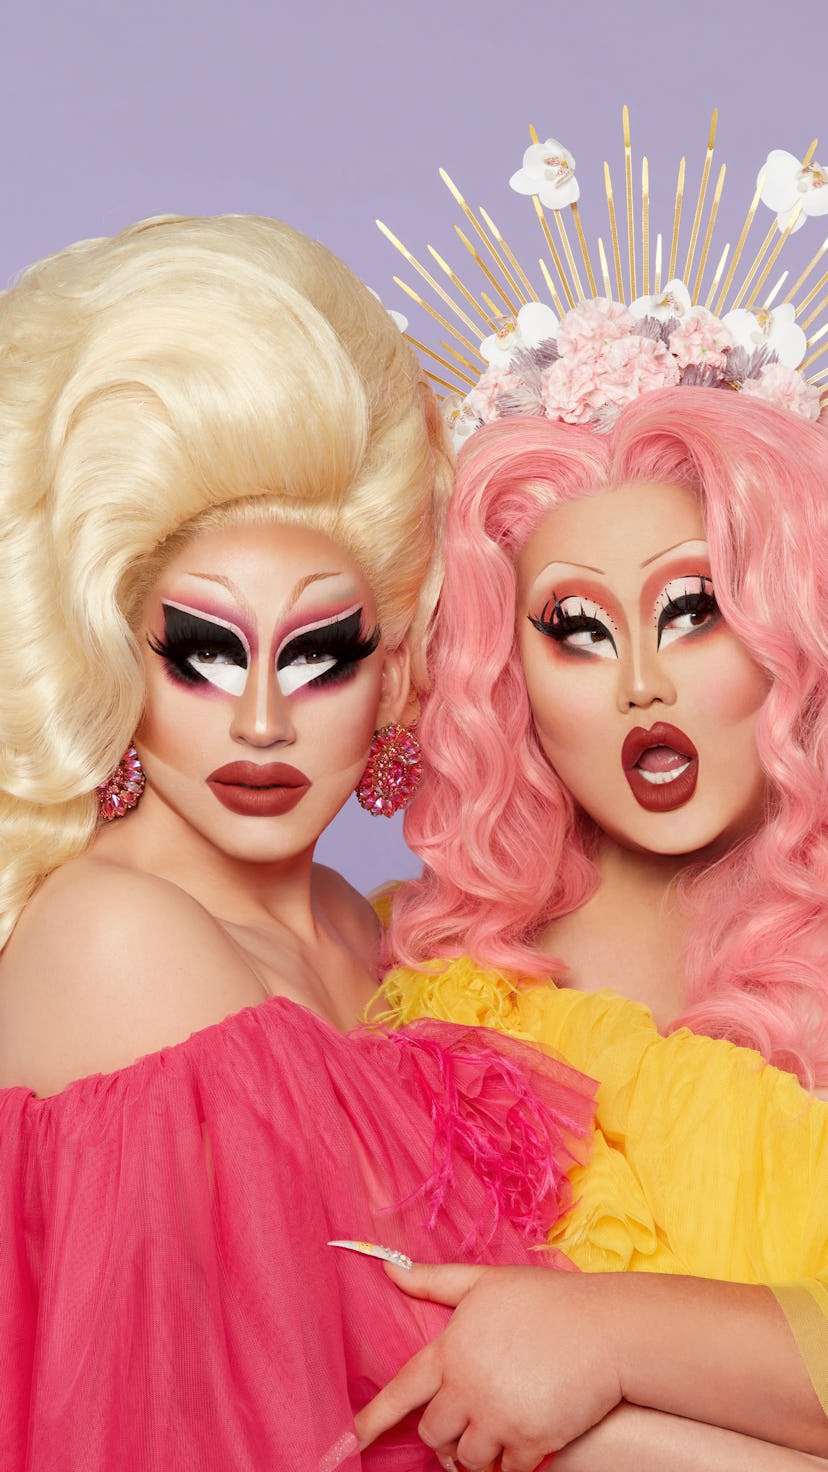 Rupaul’s Drag Race alums Kim Chi and Trixie Mattel launched a new makeup release: the BFF4EVR collec...